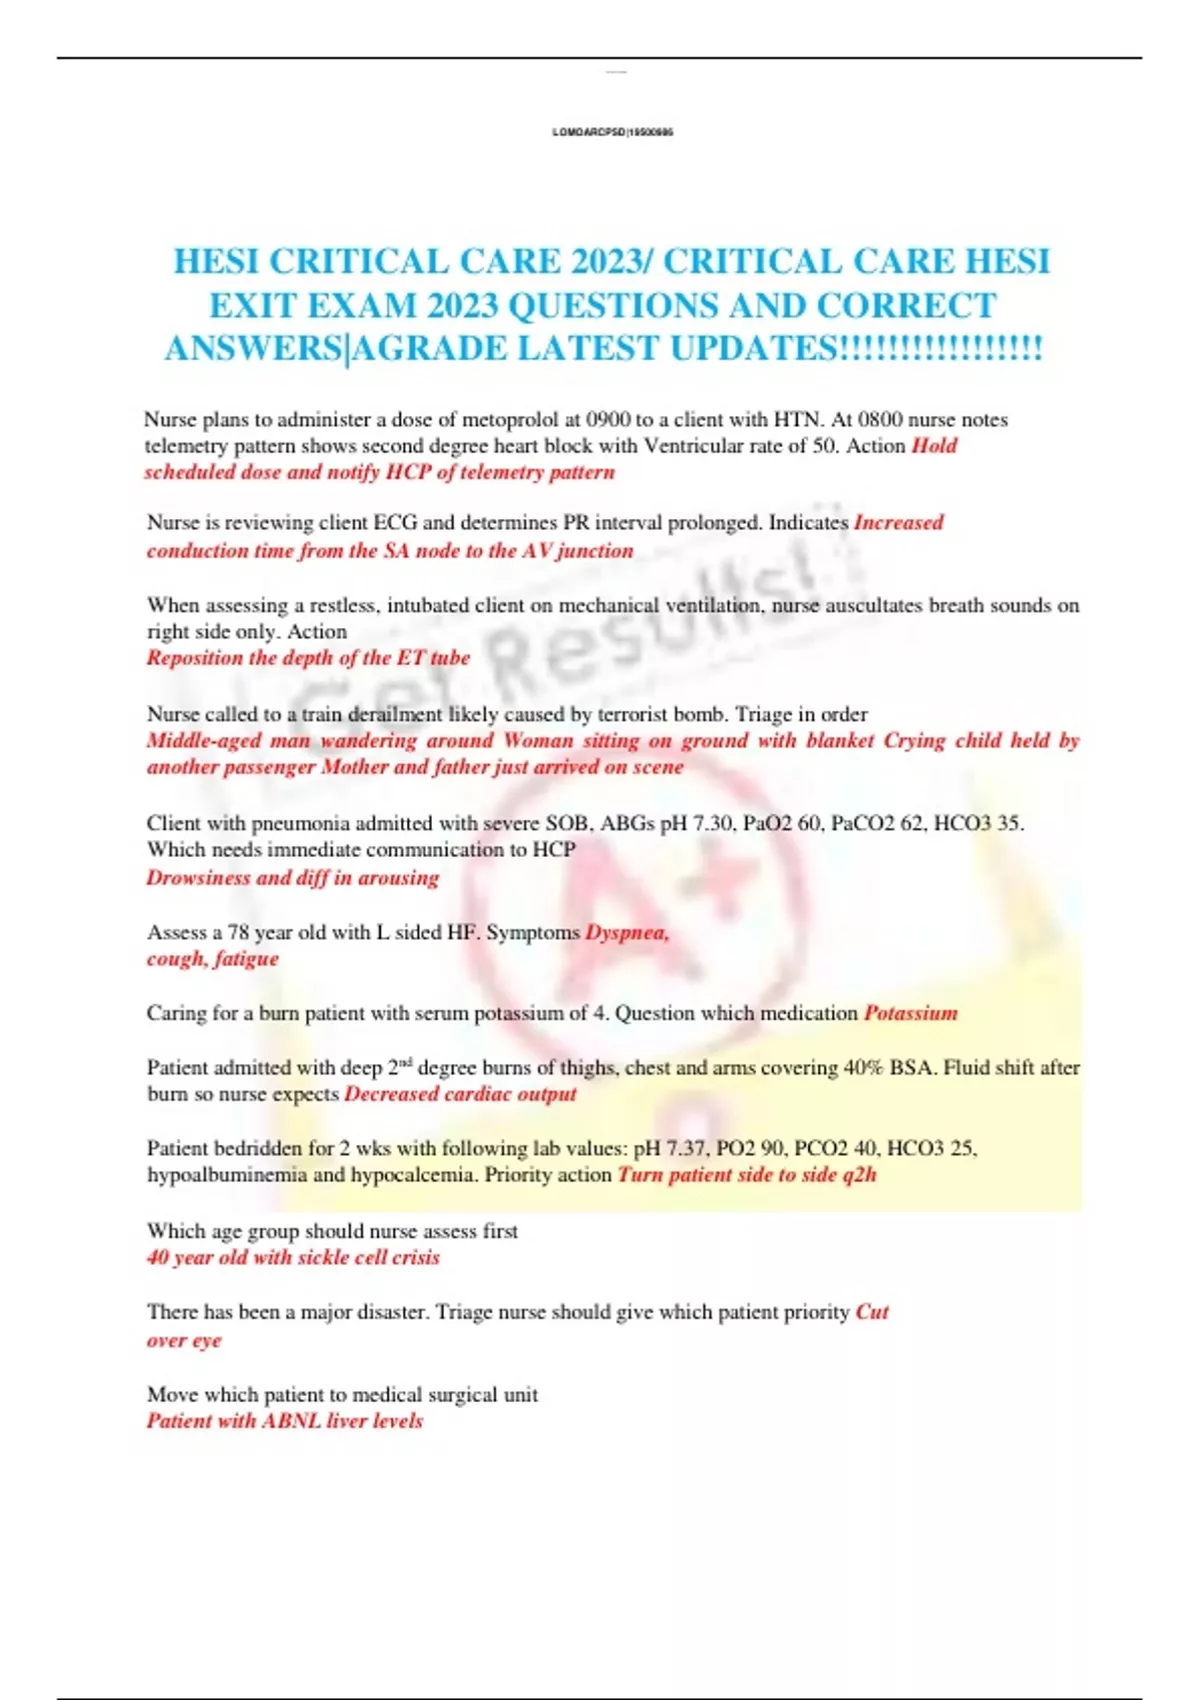 UPDATED HESI CRITICAL CARE 2024/ CRITICAL CARE HESI EXIT EXAM 2023